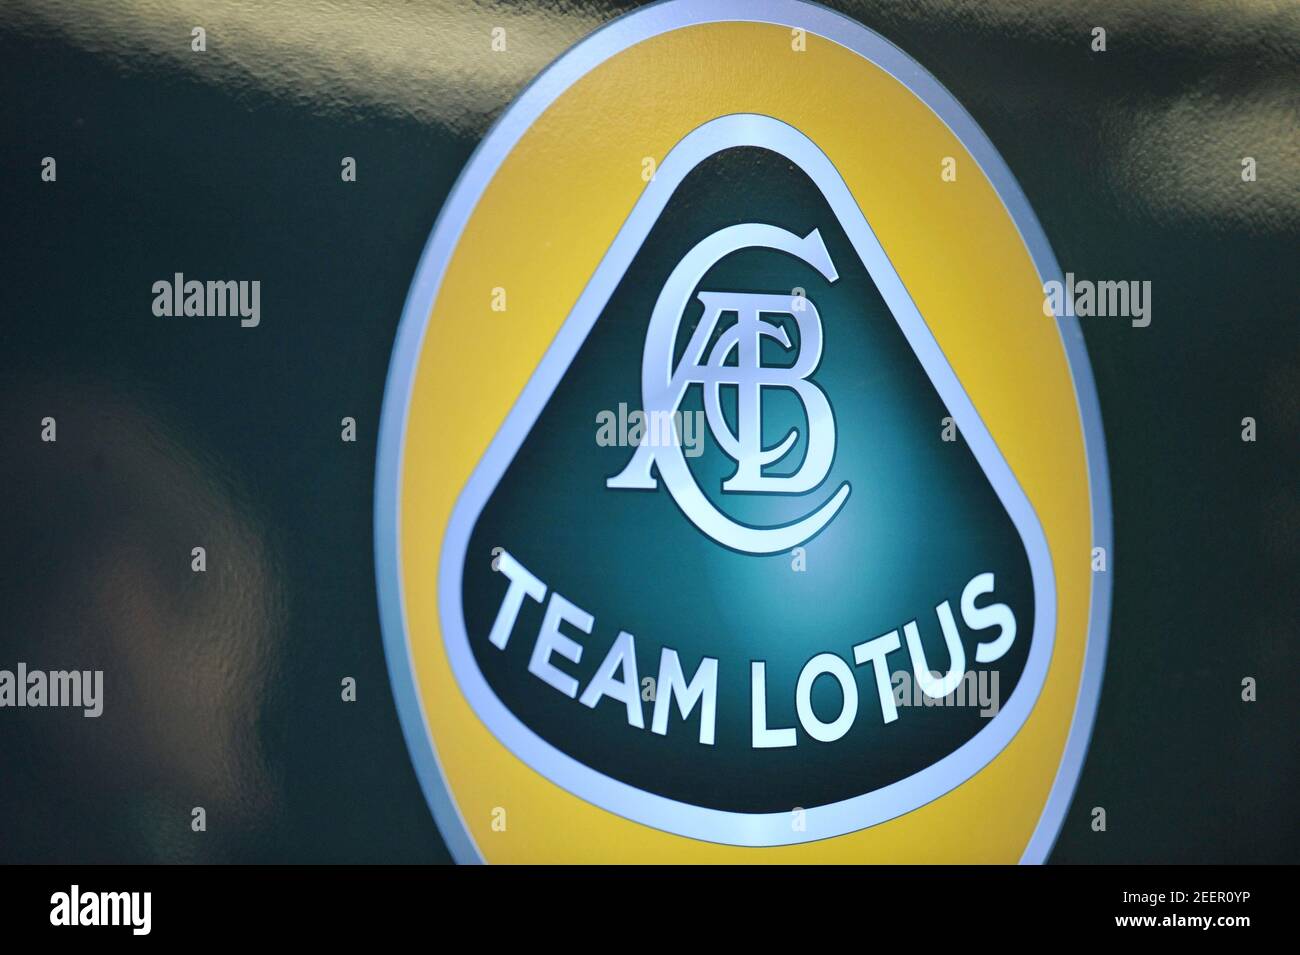 Formula One - F1 - 2011 F1 Testing - Valencia - Circuit Ricardo Tormo, Valencia, Spain  - 2/2/11  General view of the Team Lotus logo during testing  Mandatory Credit: Action Images / Crispin Thruston  Livepic Stock Photo